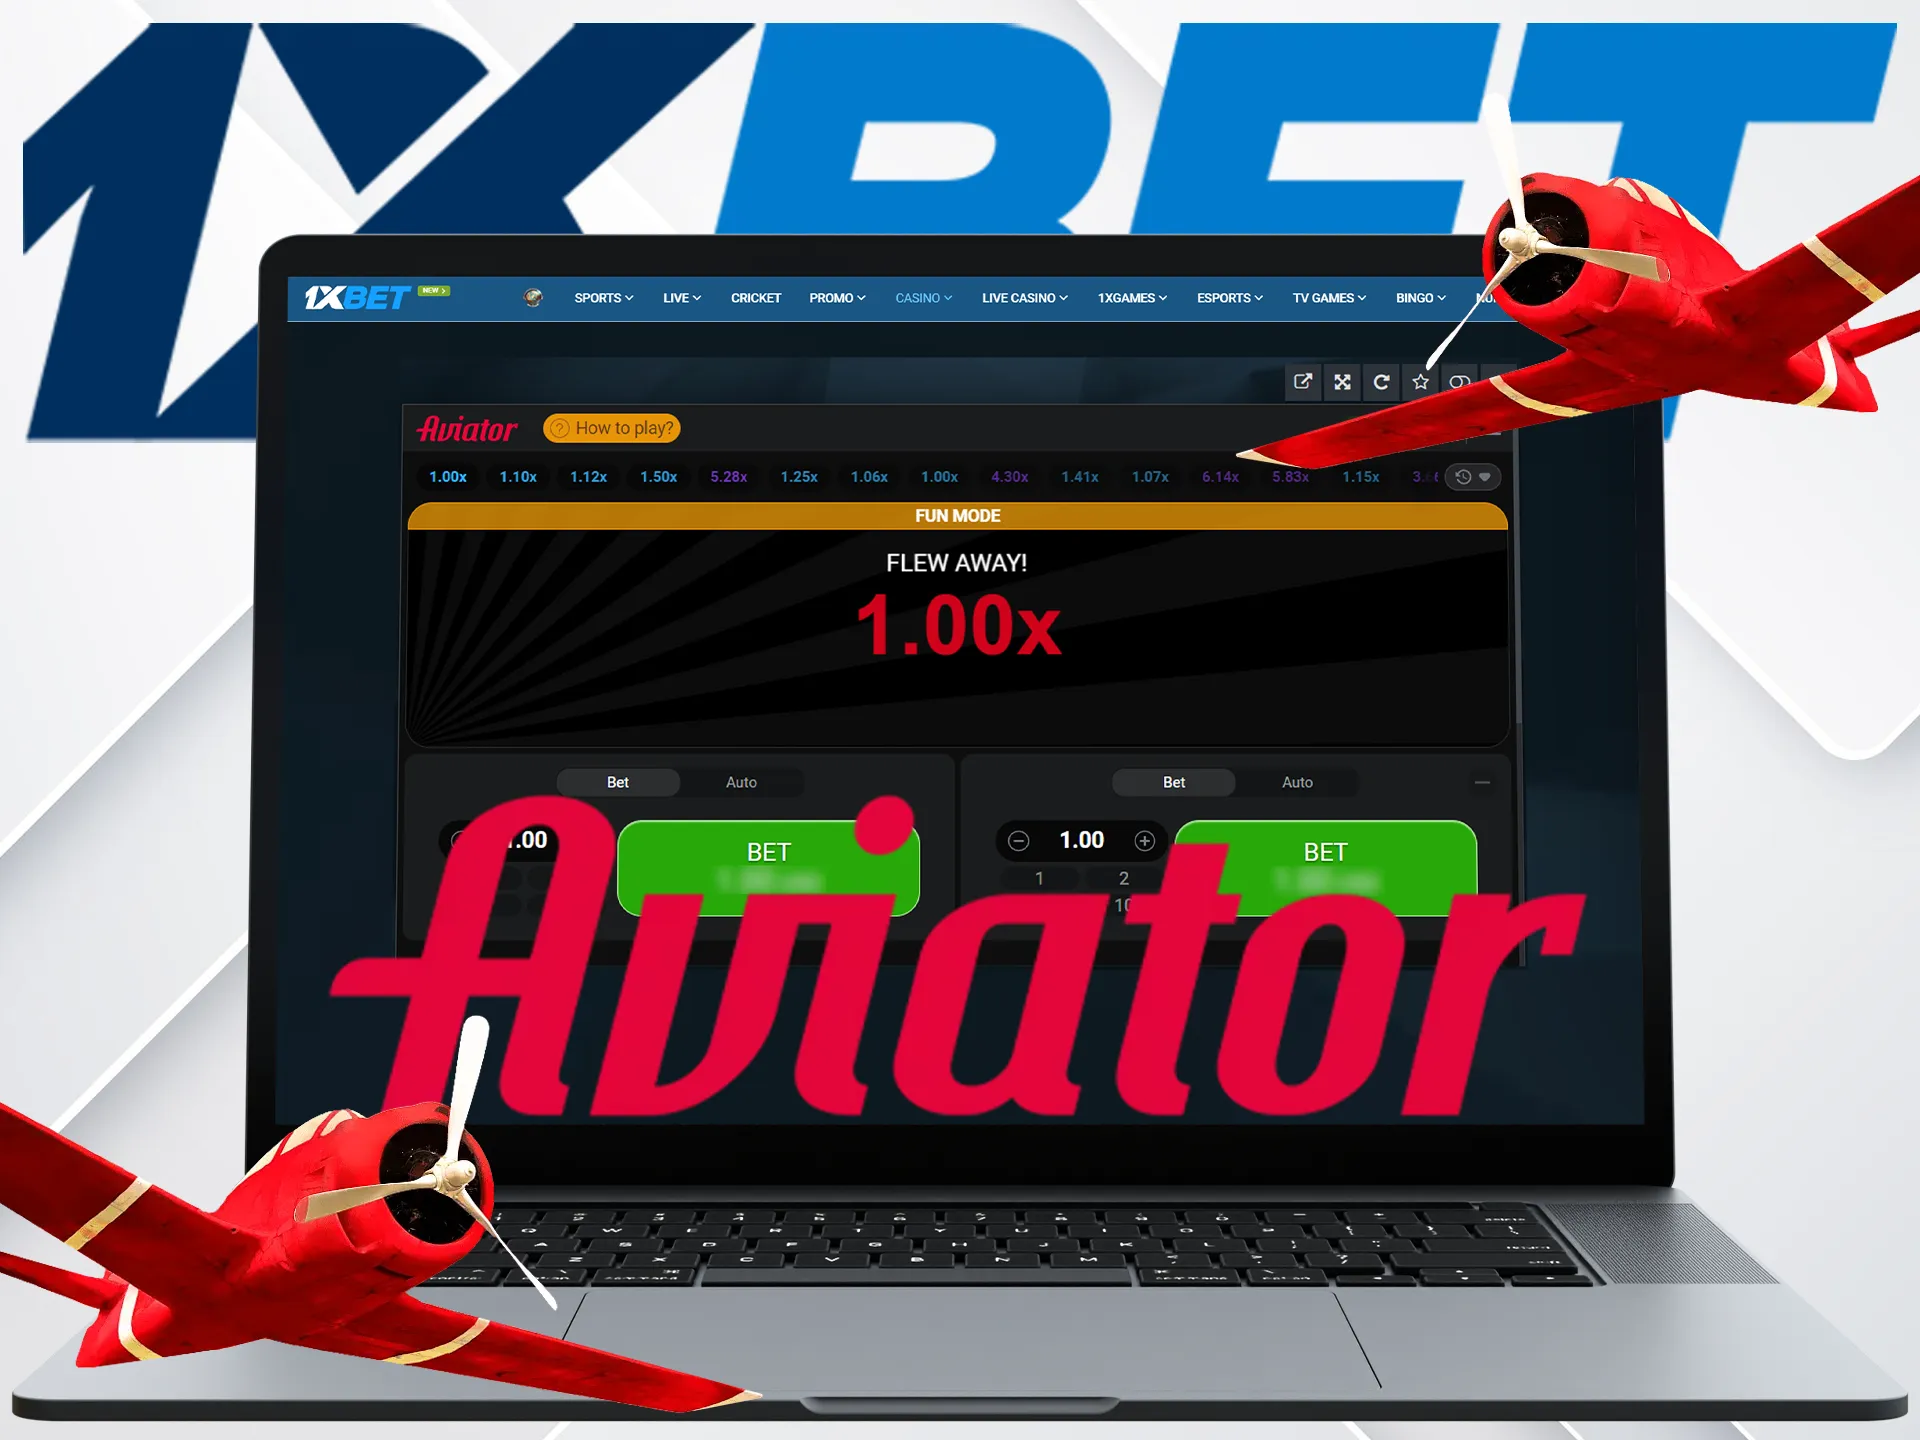 The 1xbet Aviator game attracts many gambling enthusiasts with its clear design and user-friendly controls.